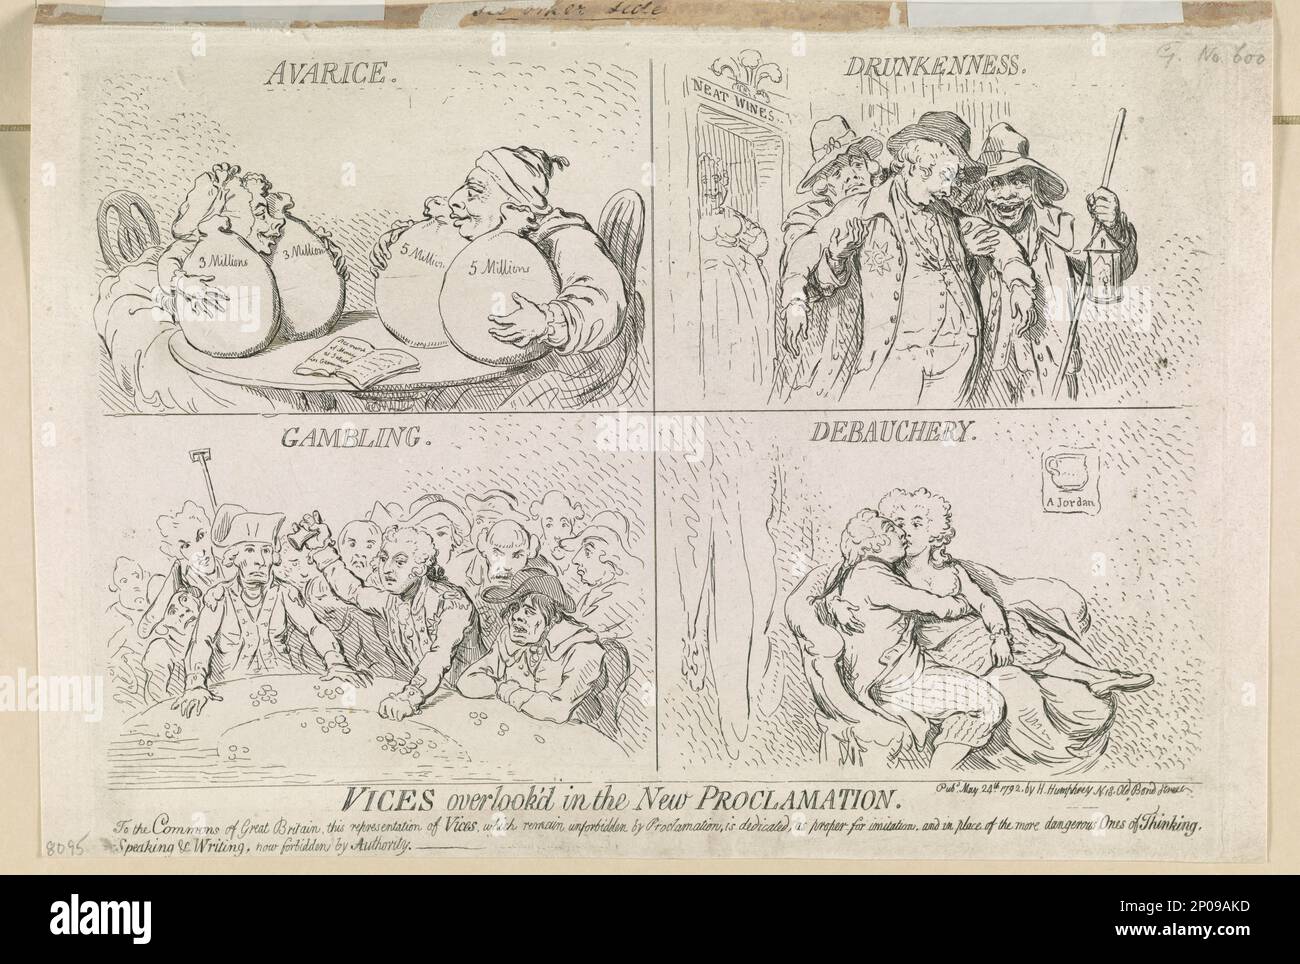 Vices overlook'd in the new proclamation Enchantments lately seen upon the mountains of Wales, - or - Shon-ap-Morgan's reconcilement to the Fairy Princess     Js. Gy. des. et fect.. British Cartoon Prints Collection . George,IV,King of Great Britain,1762-1830. , Fitzherbert, Maria Anne,1756-1837. , Vice,1790-1800. , Kissing,1790-1800. , Supernatural beings,1790-1800. Stock Photo